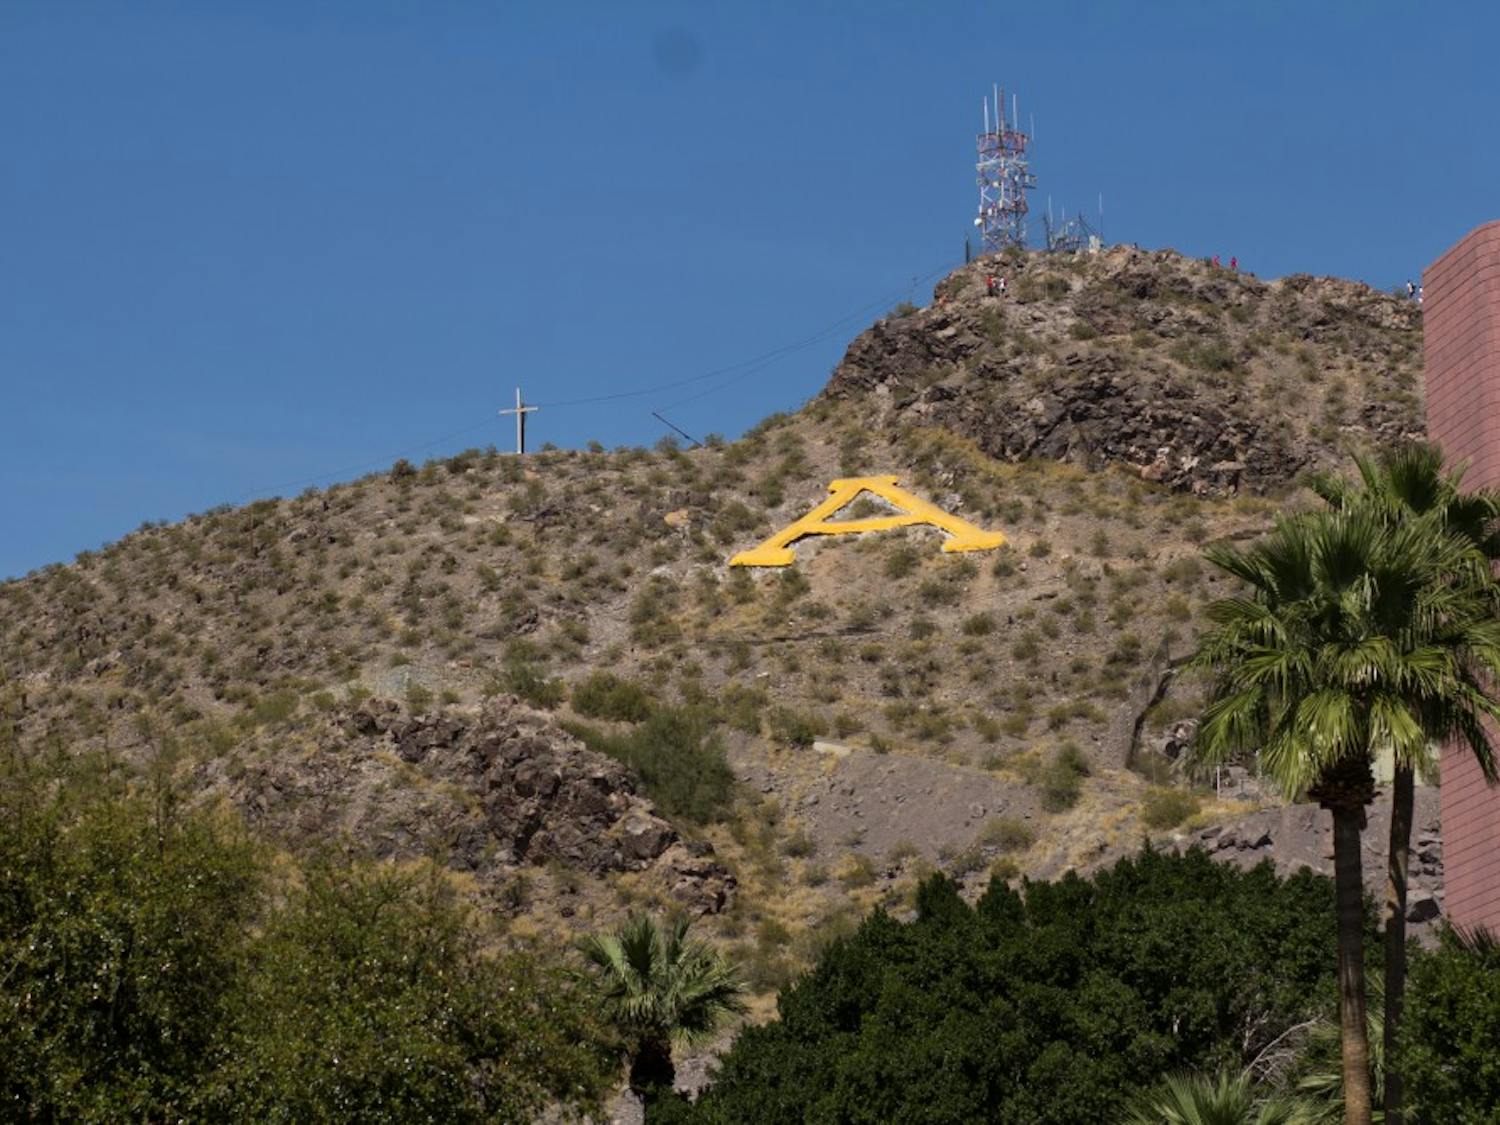 Tempe Butte, 'A Mountain', is pictured&nbsp;on Wednesday, March 16, 2016.